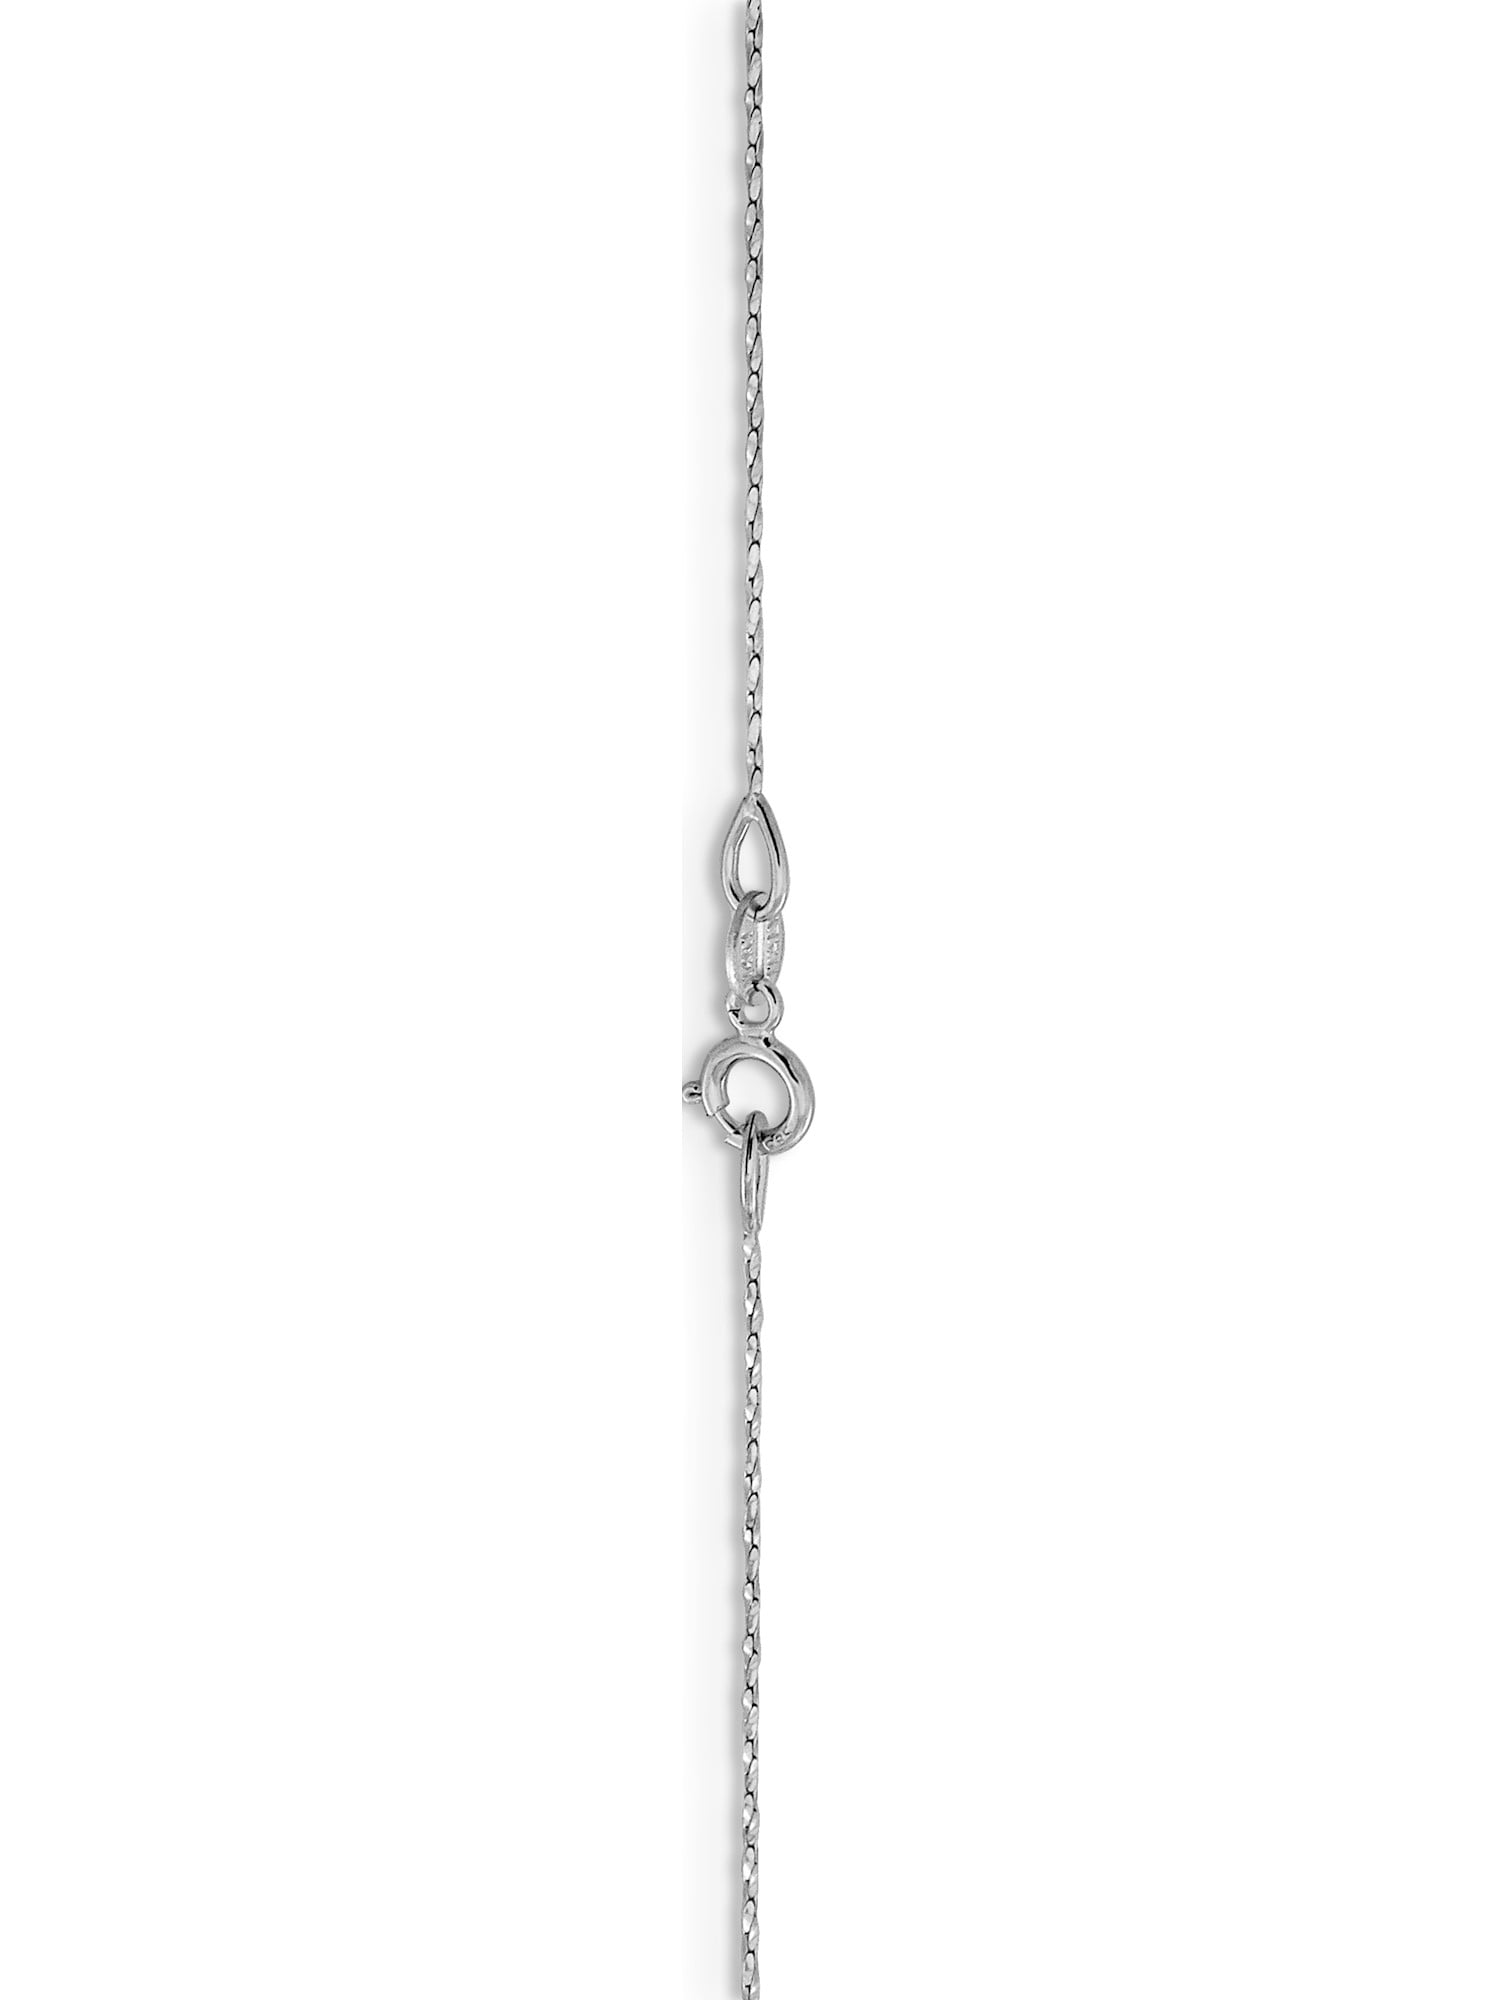 Beautiful Leslie's 14K White Gold .6 mm D/C Twisted Box Chain